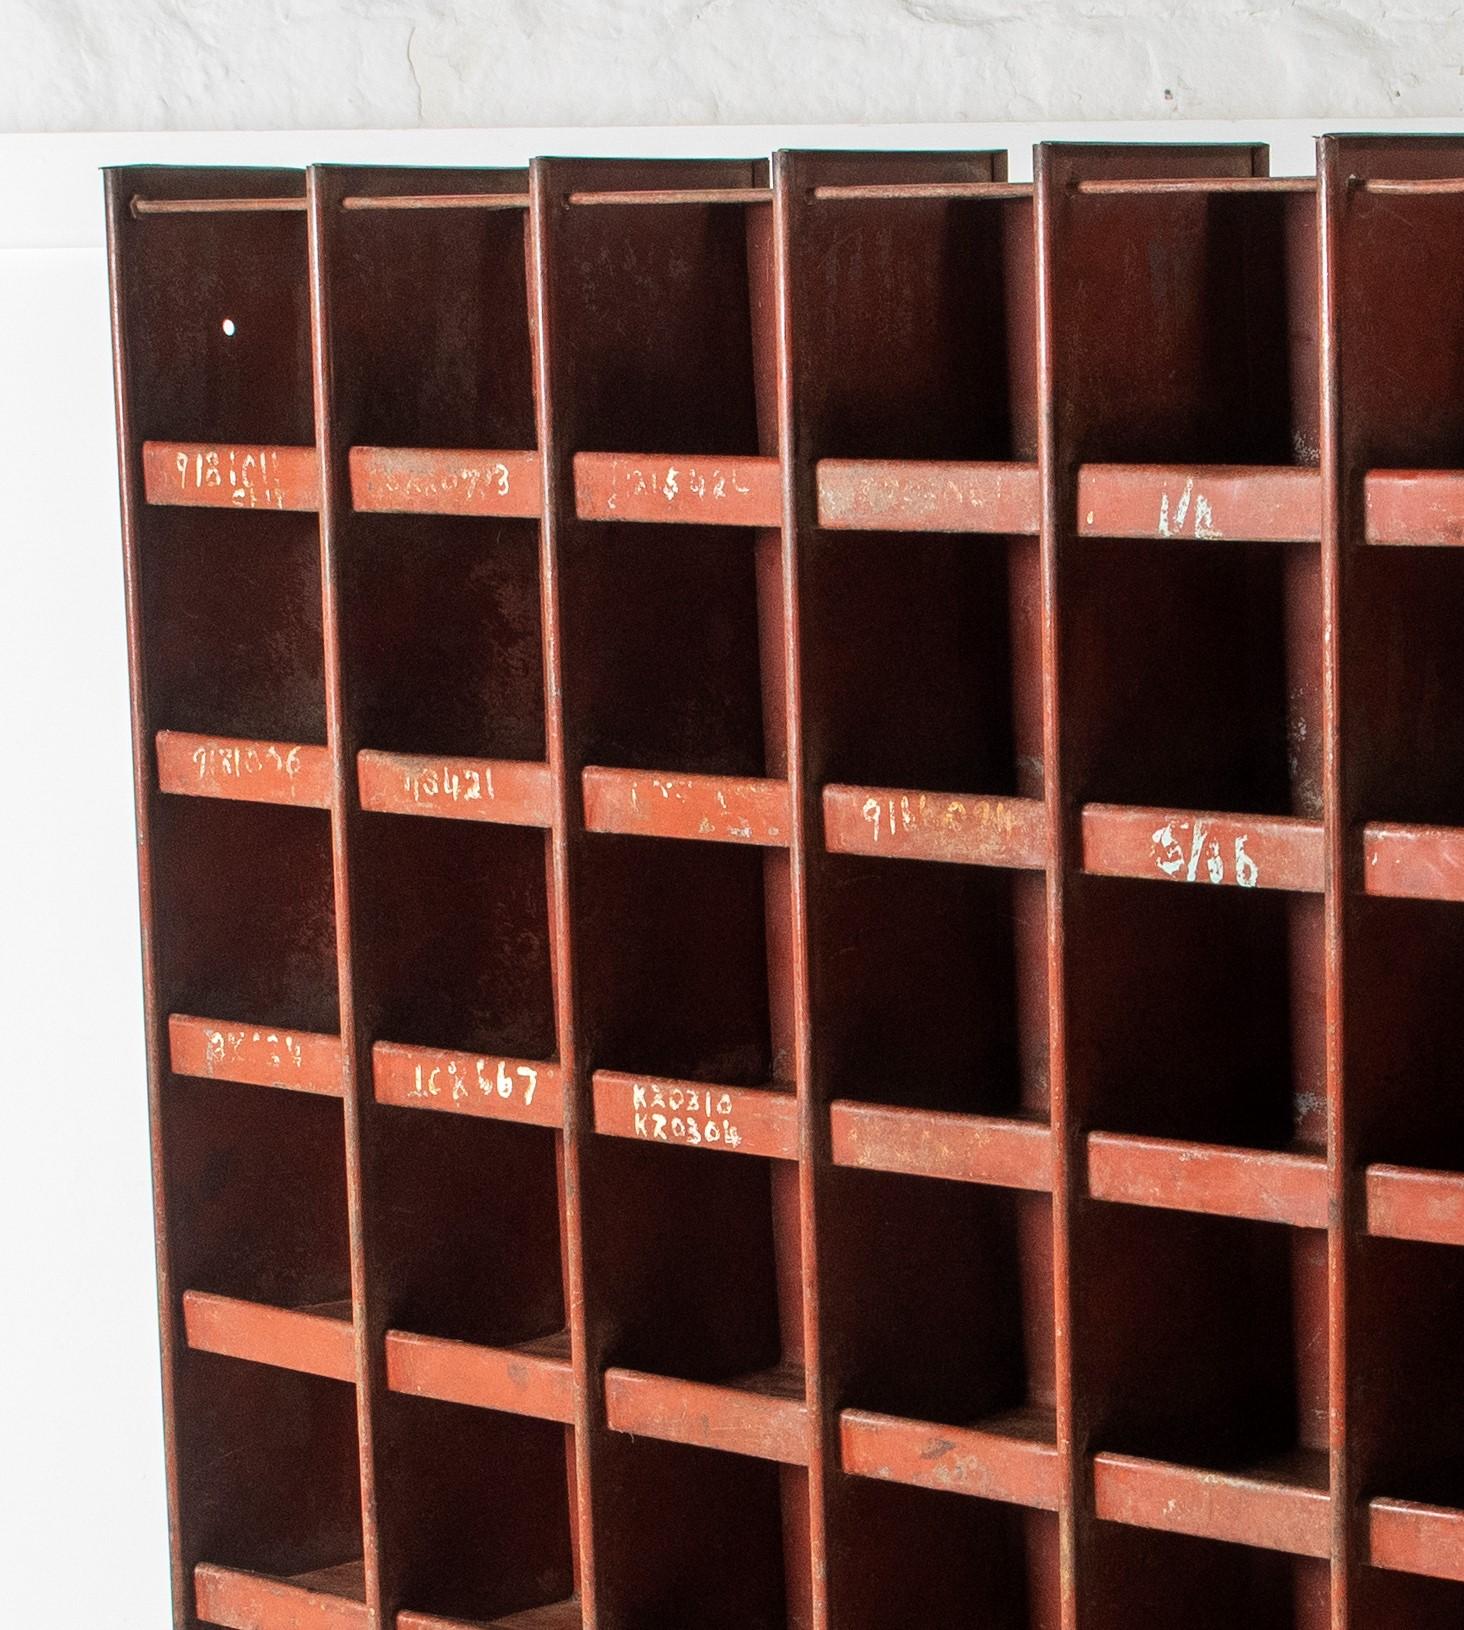 An early 20th century industrial pigeon hole storage unit, good size with 48 pigeon holes. The piece is made using steel rods and bolts and is an early example of industrial furniture pre-dating modern methods of welding. In its original (as found)